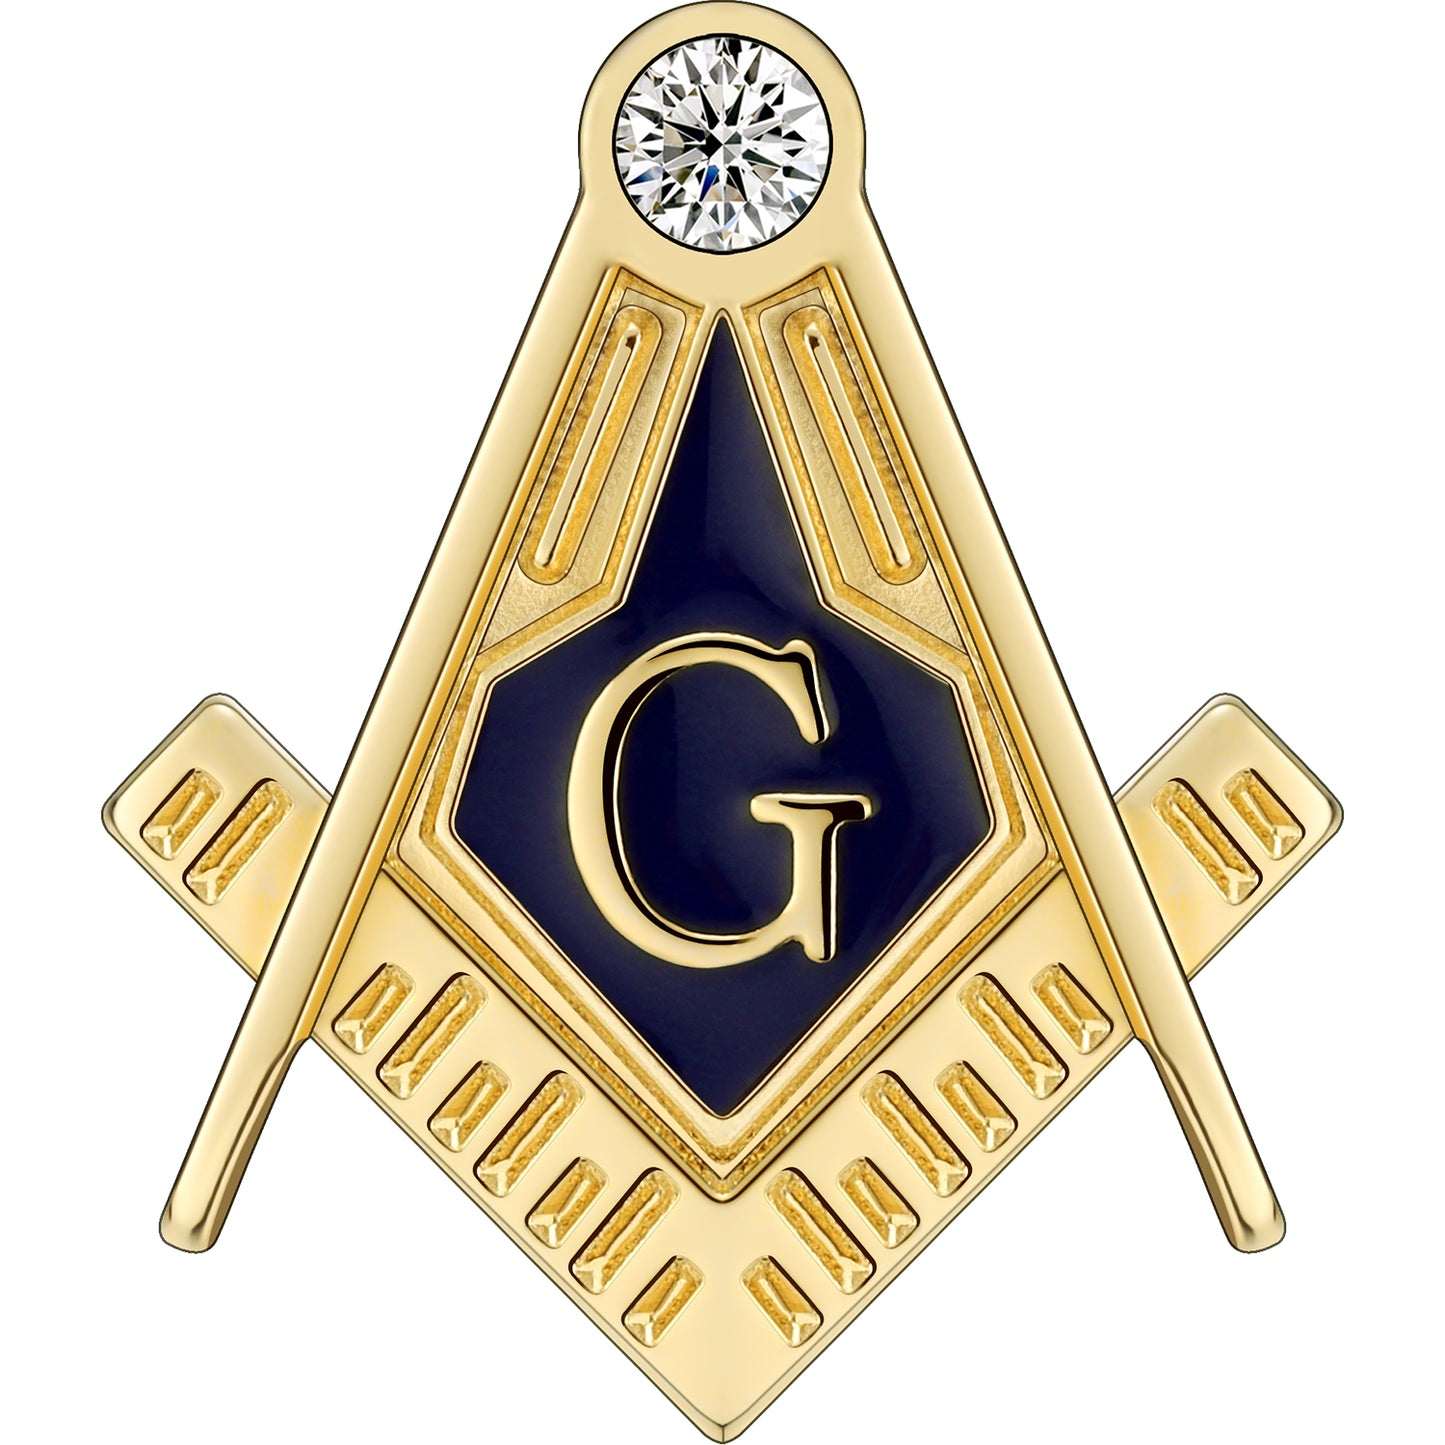 Freemason Masonic lapel Pins Brooch for Men and Women, Suits accessories for business.